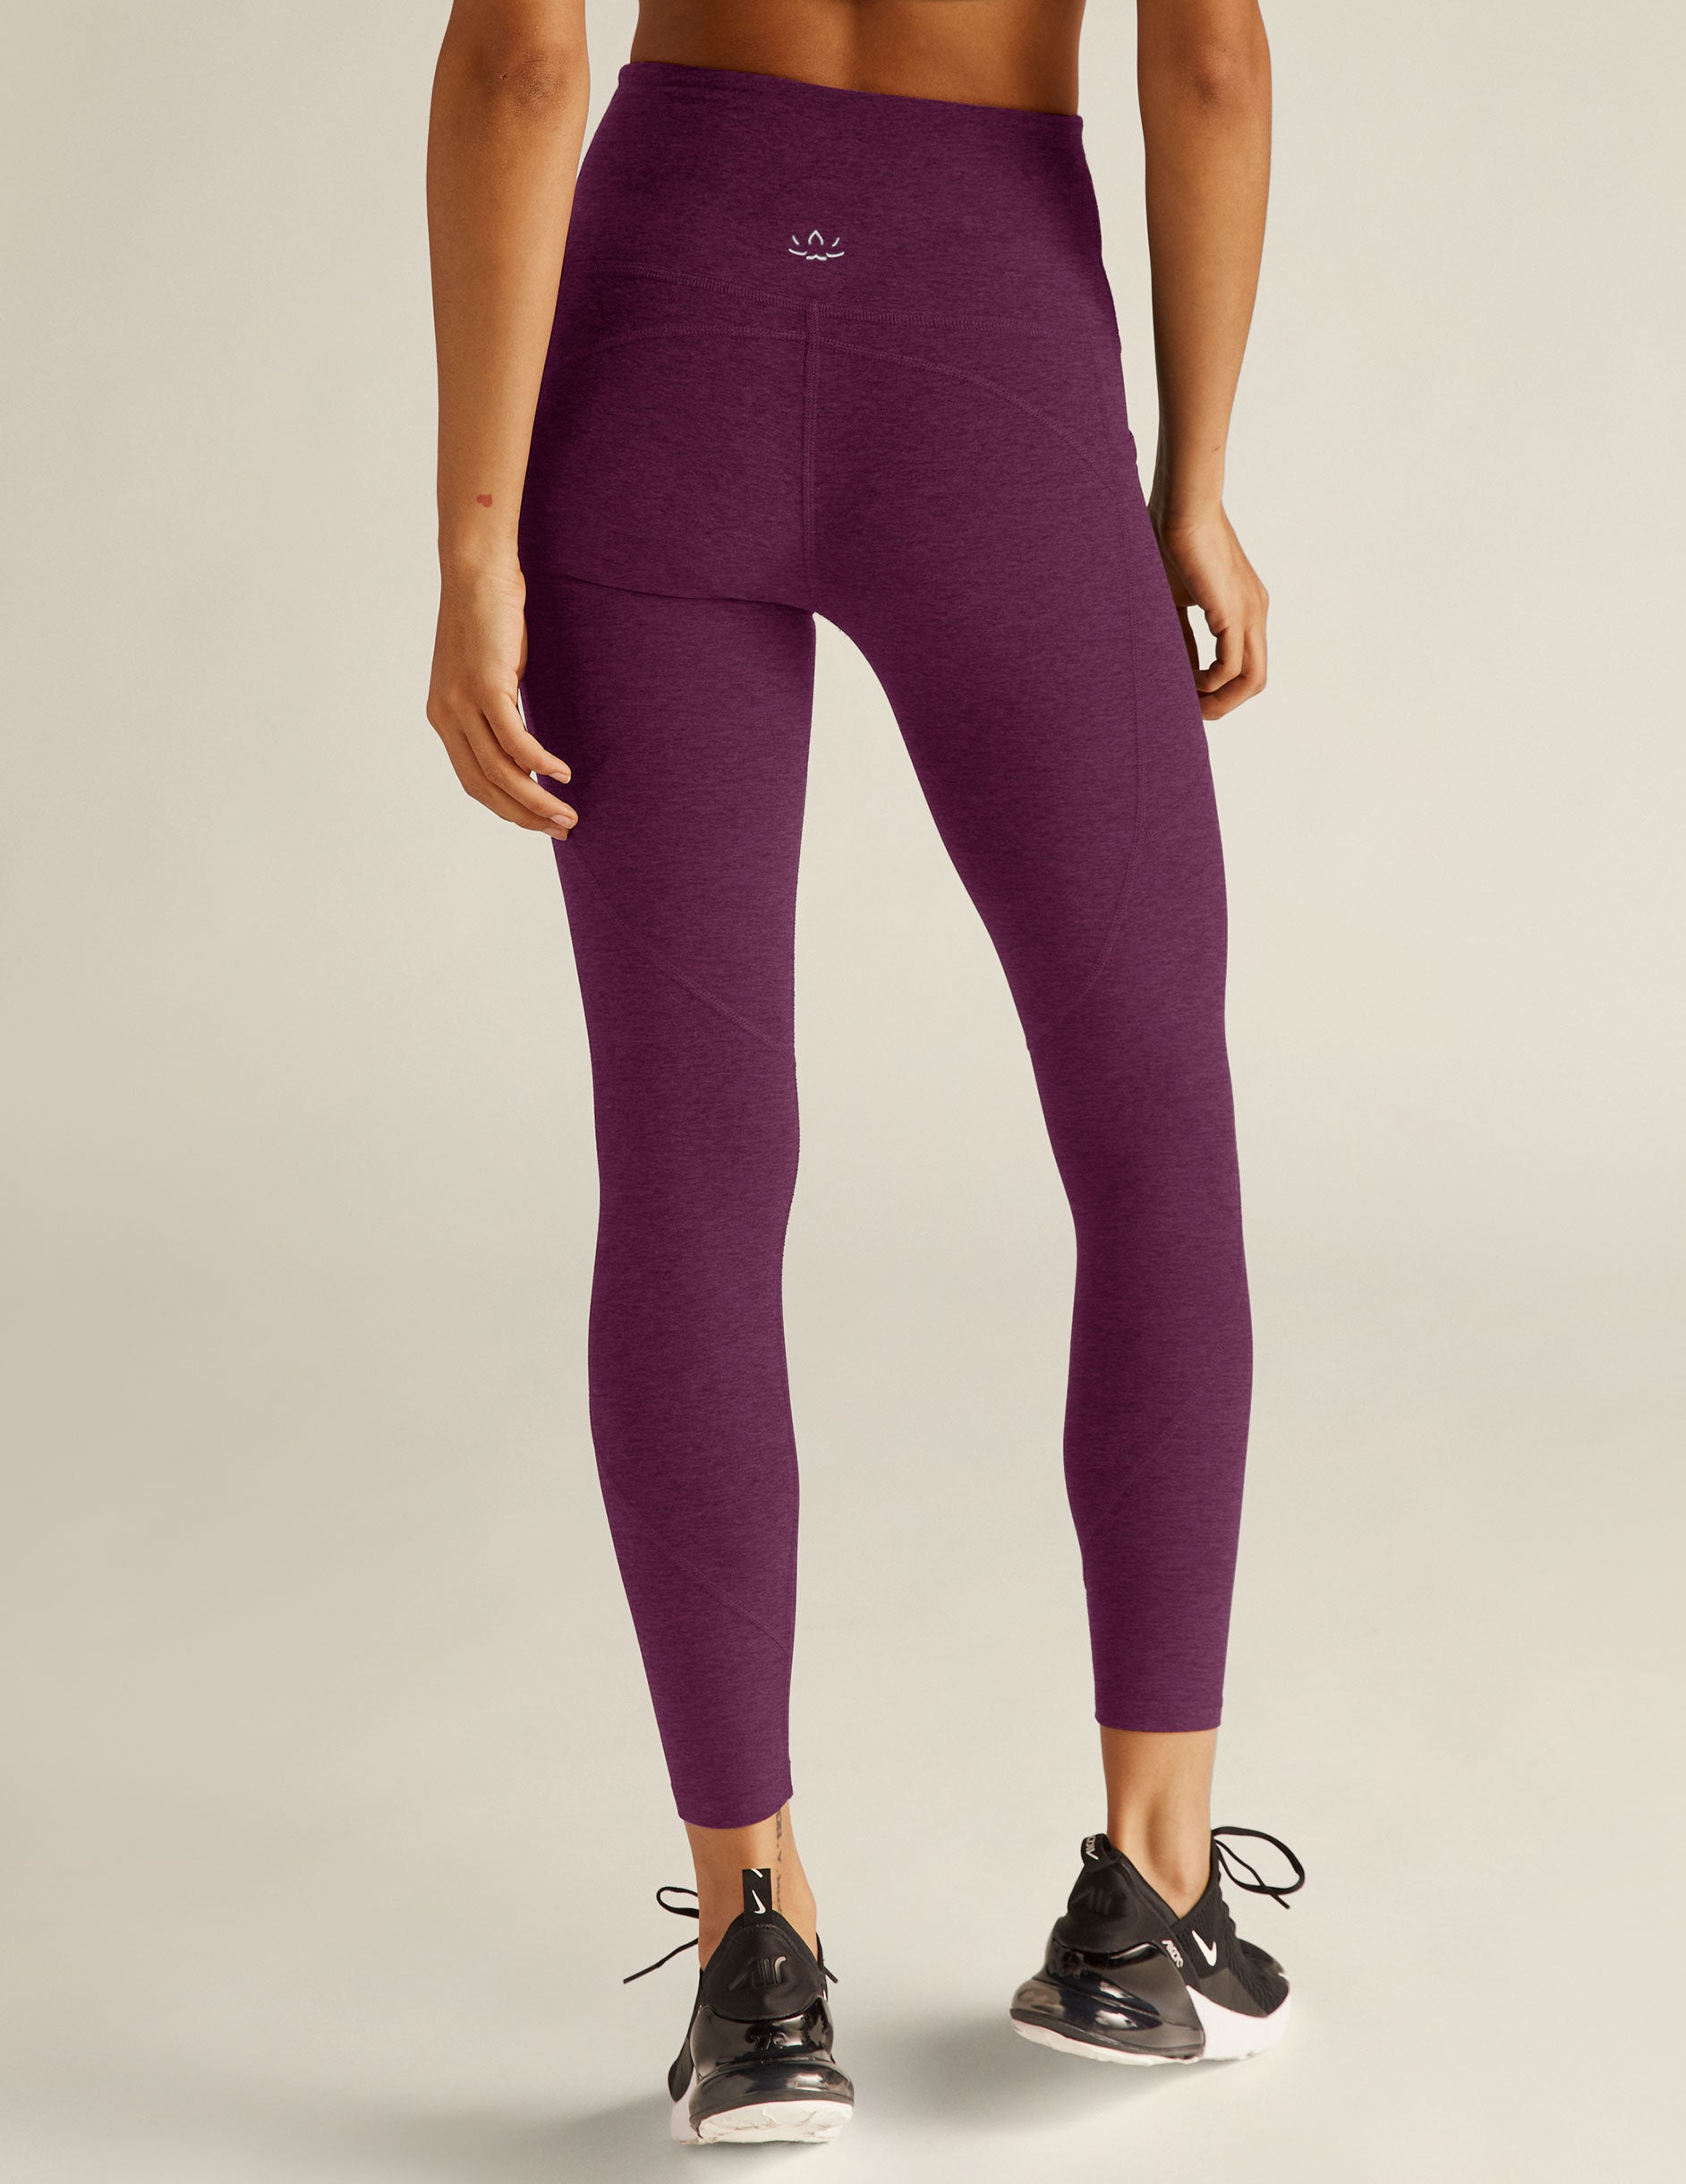 Beyond Yoga Out of Pocket Maternity Leggings MSRP $110 Size М, TR 1474